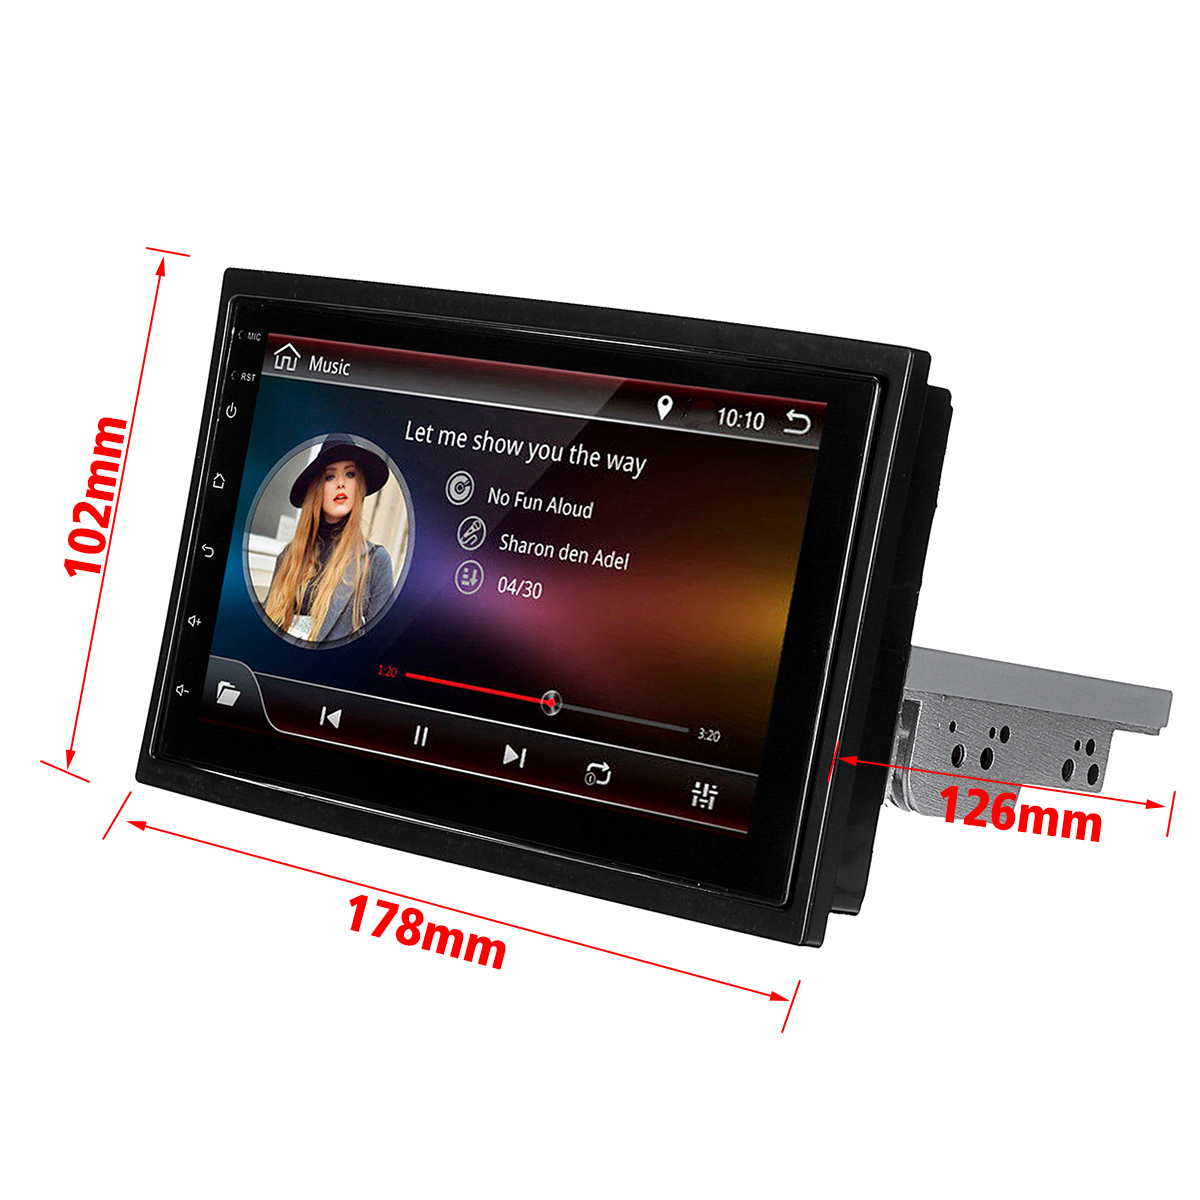 Bracket Double 2 DIN Android 8.1 7" Touch Car GPS Stereo Radio Quad Core Player 